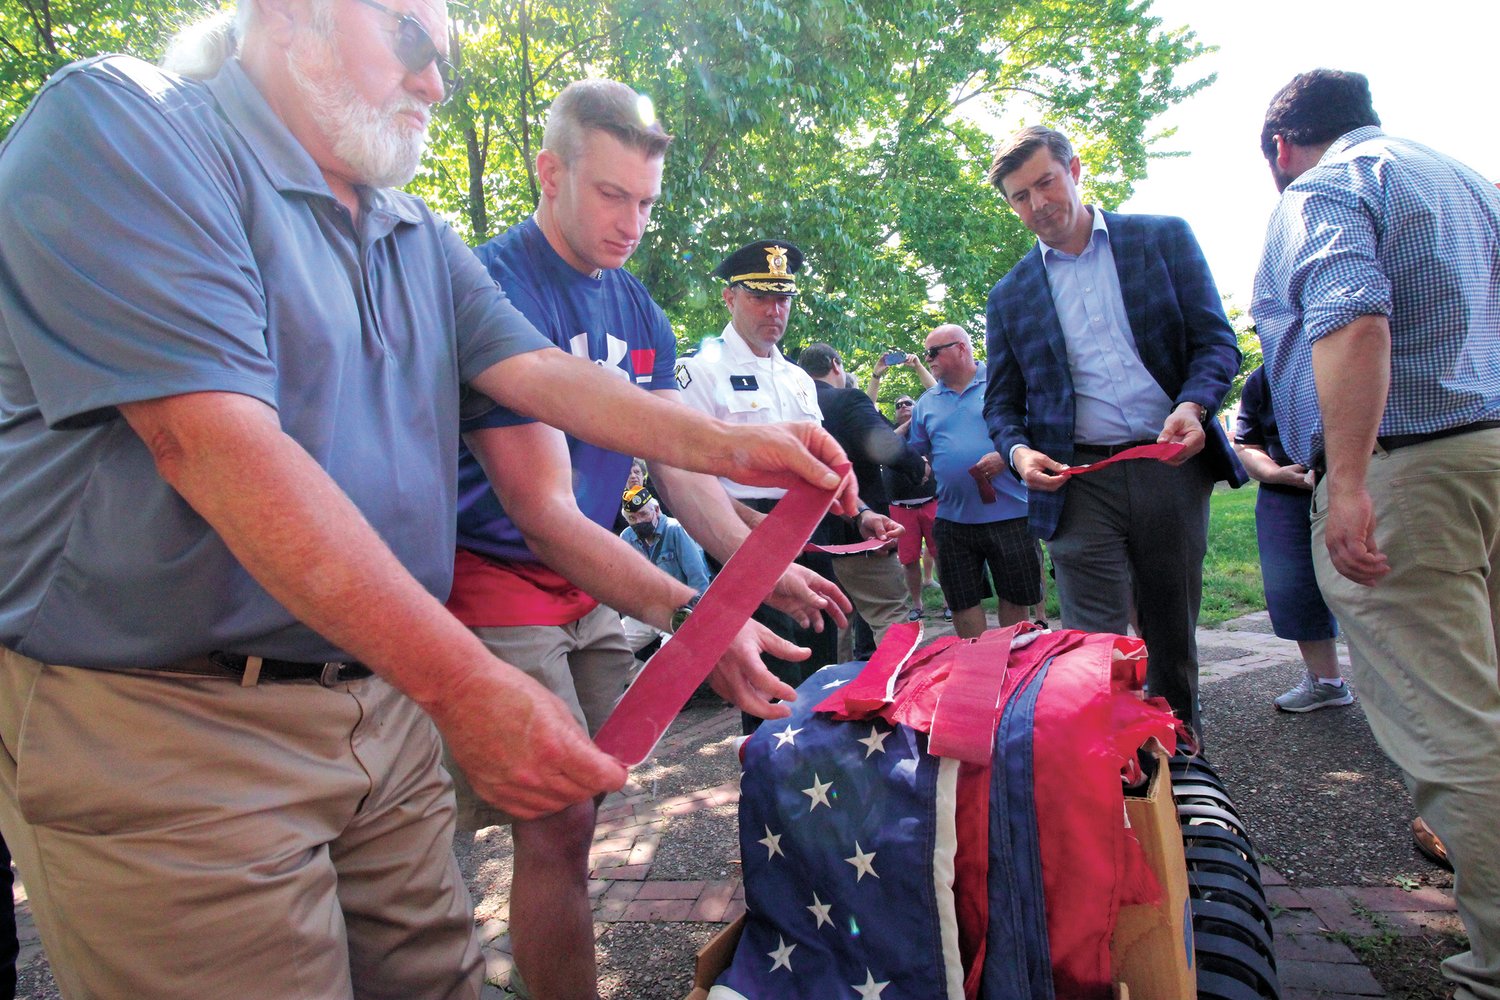 REITRING THE FLAG: From left Rep. David Bennett, Rep. Evan Shanley, Col. Bradford Connor and Matt LaMountain place tattered flag remians on a pile of flags to be reitred by incinaration.